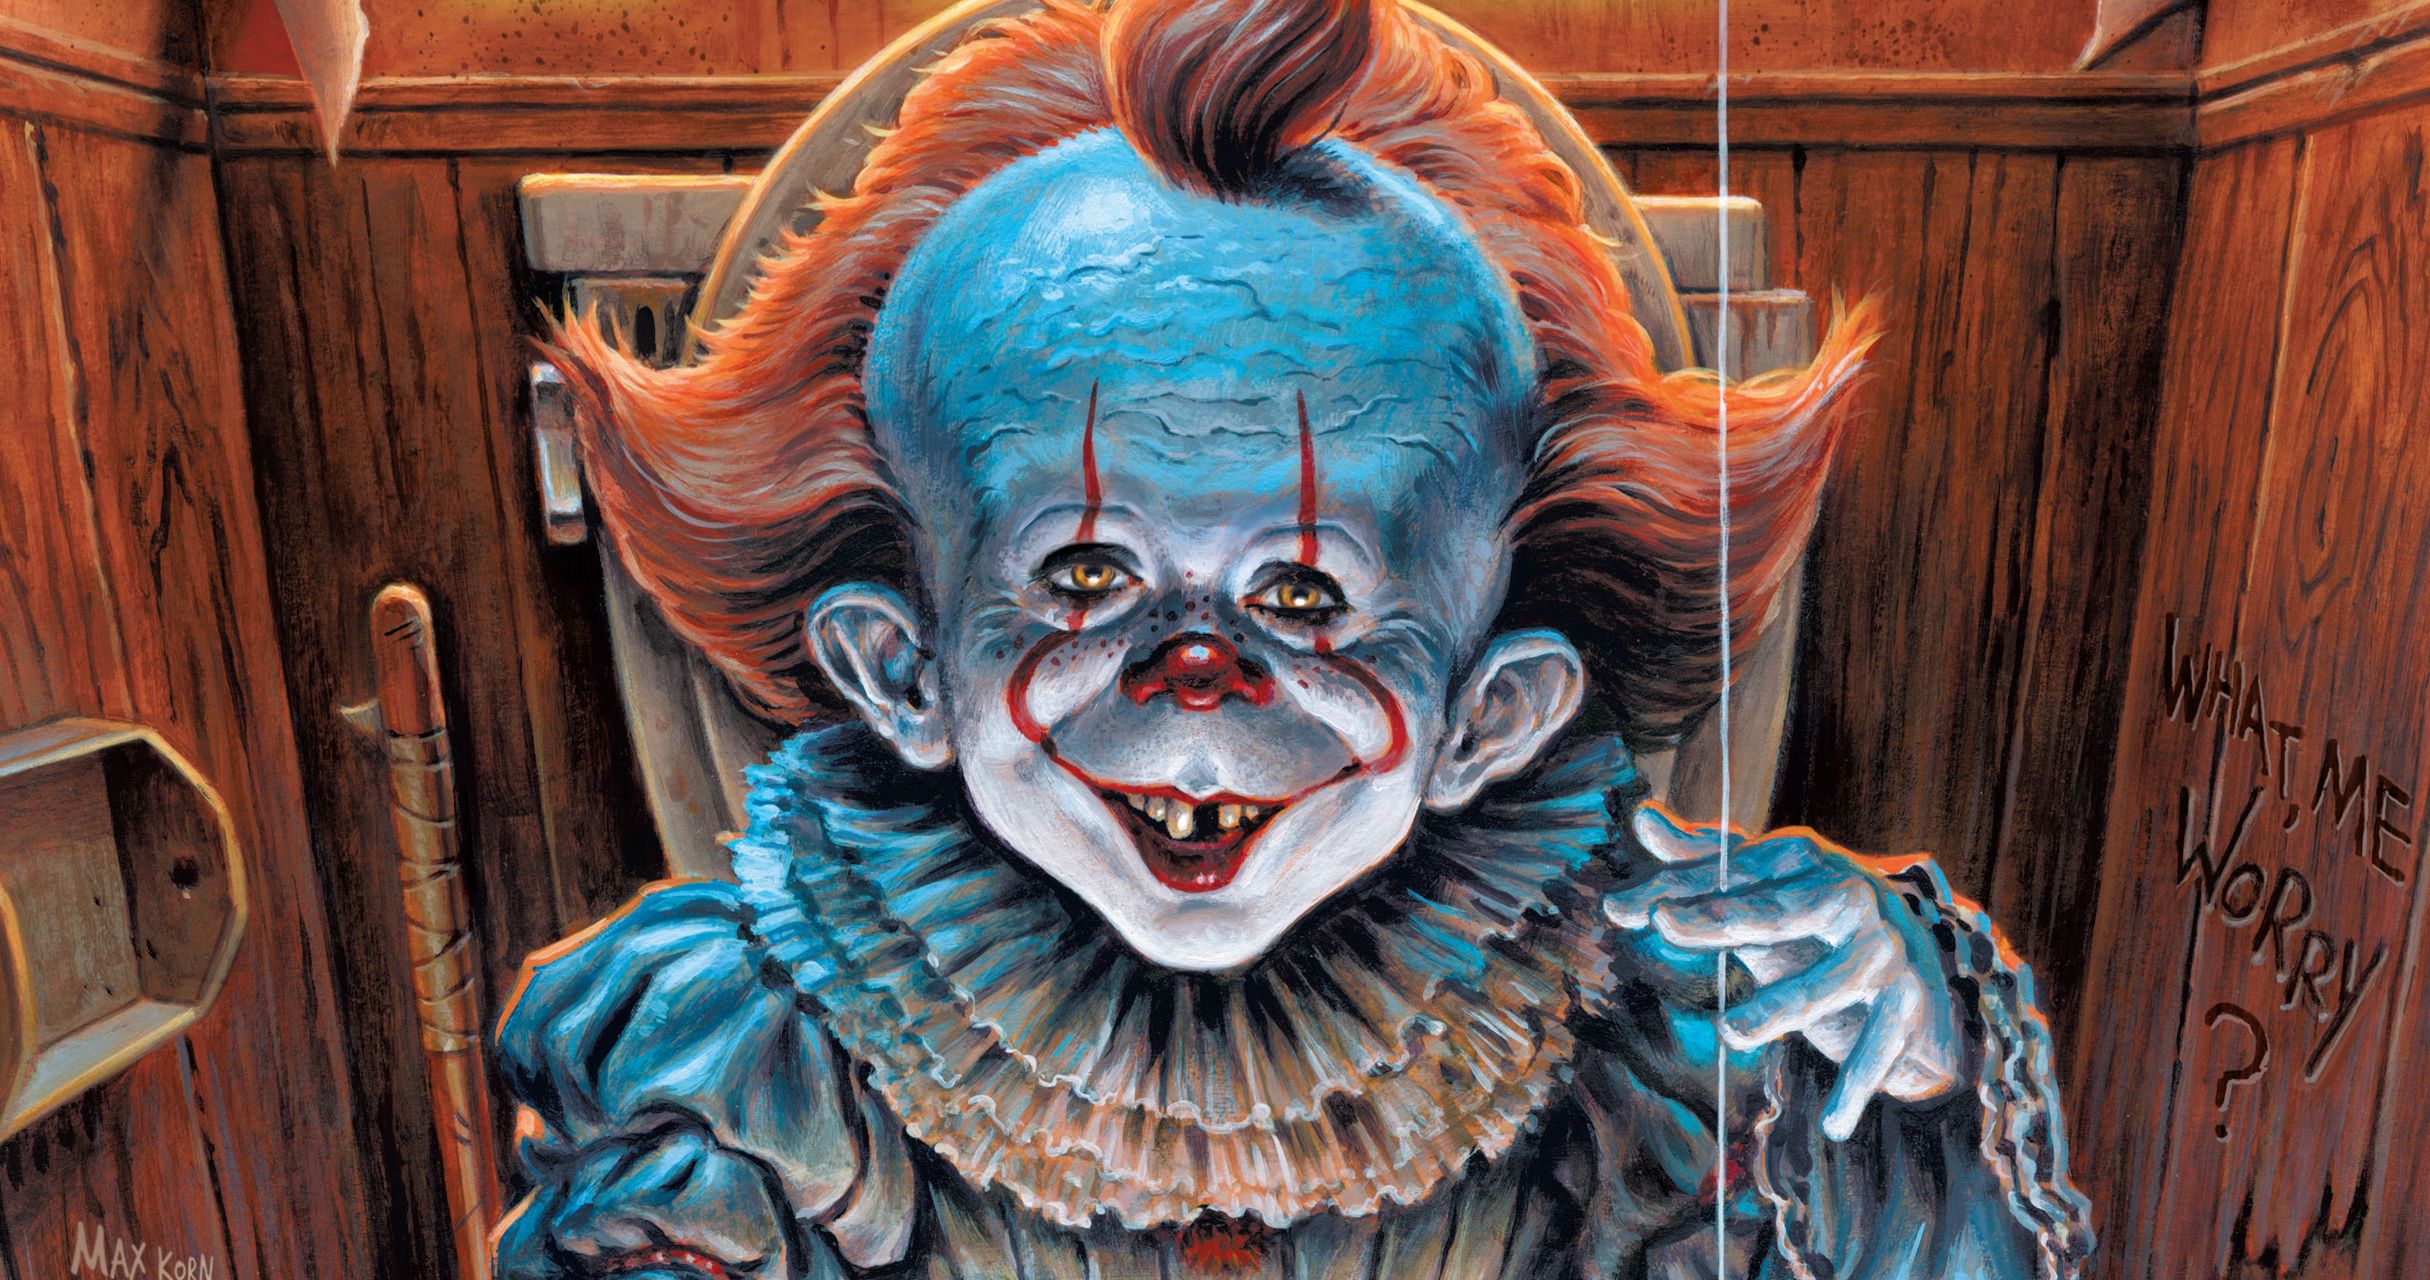 First Look at MAD Magazine's CGI Horrors from the Dizzy Vault [Exclusive]